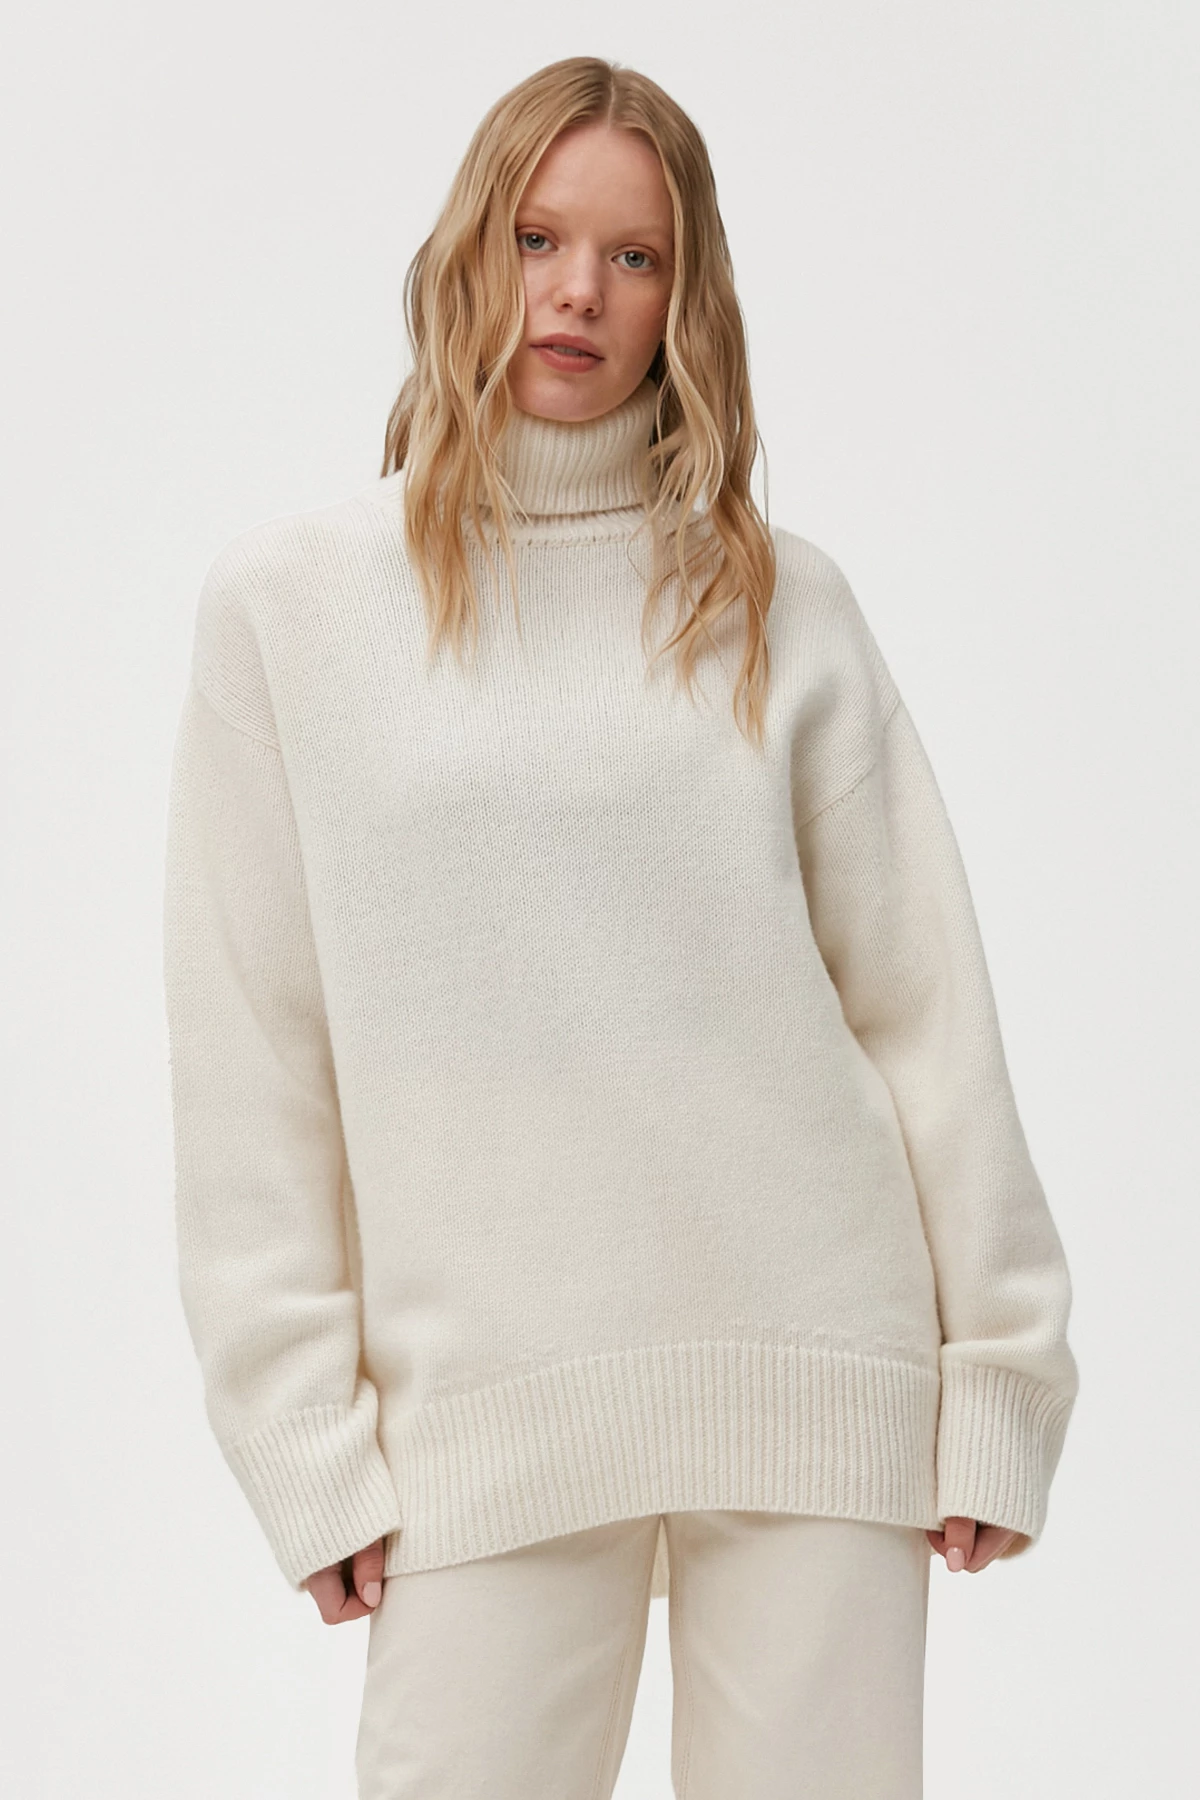 Cashmere milky high neck loose-fit sweater, photo 2